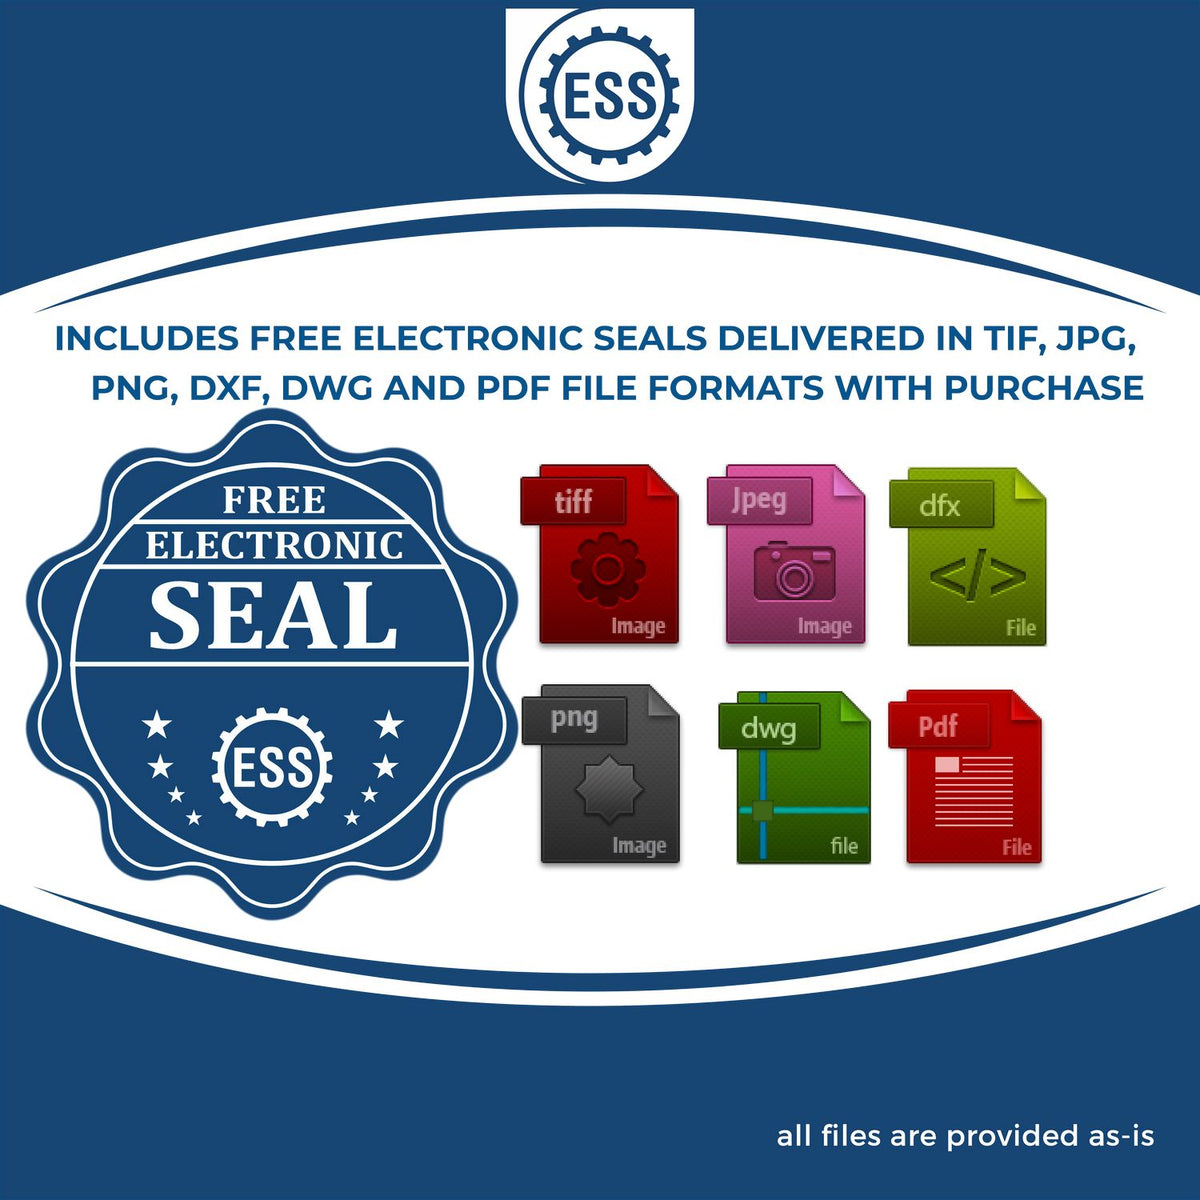 An infographic for the free electronic seal for the Premium MaxLight Pre-Inked Washington Geology Stamp illustrating the different file type icons such as DXF, DWG, TIF, JPG and PNG.